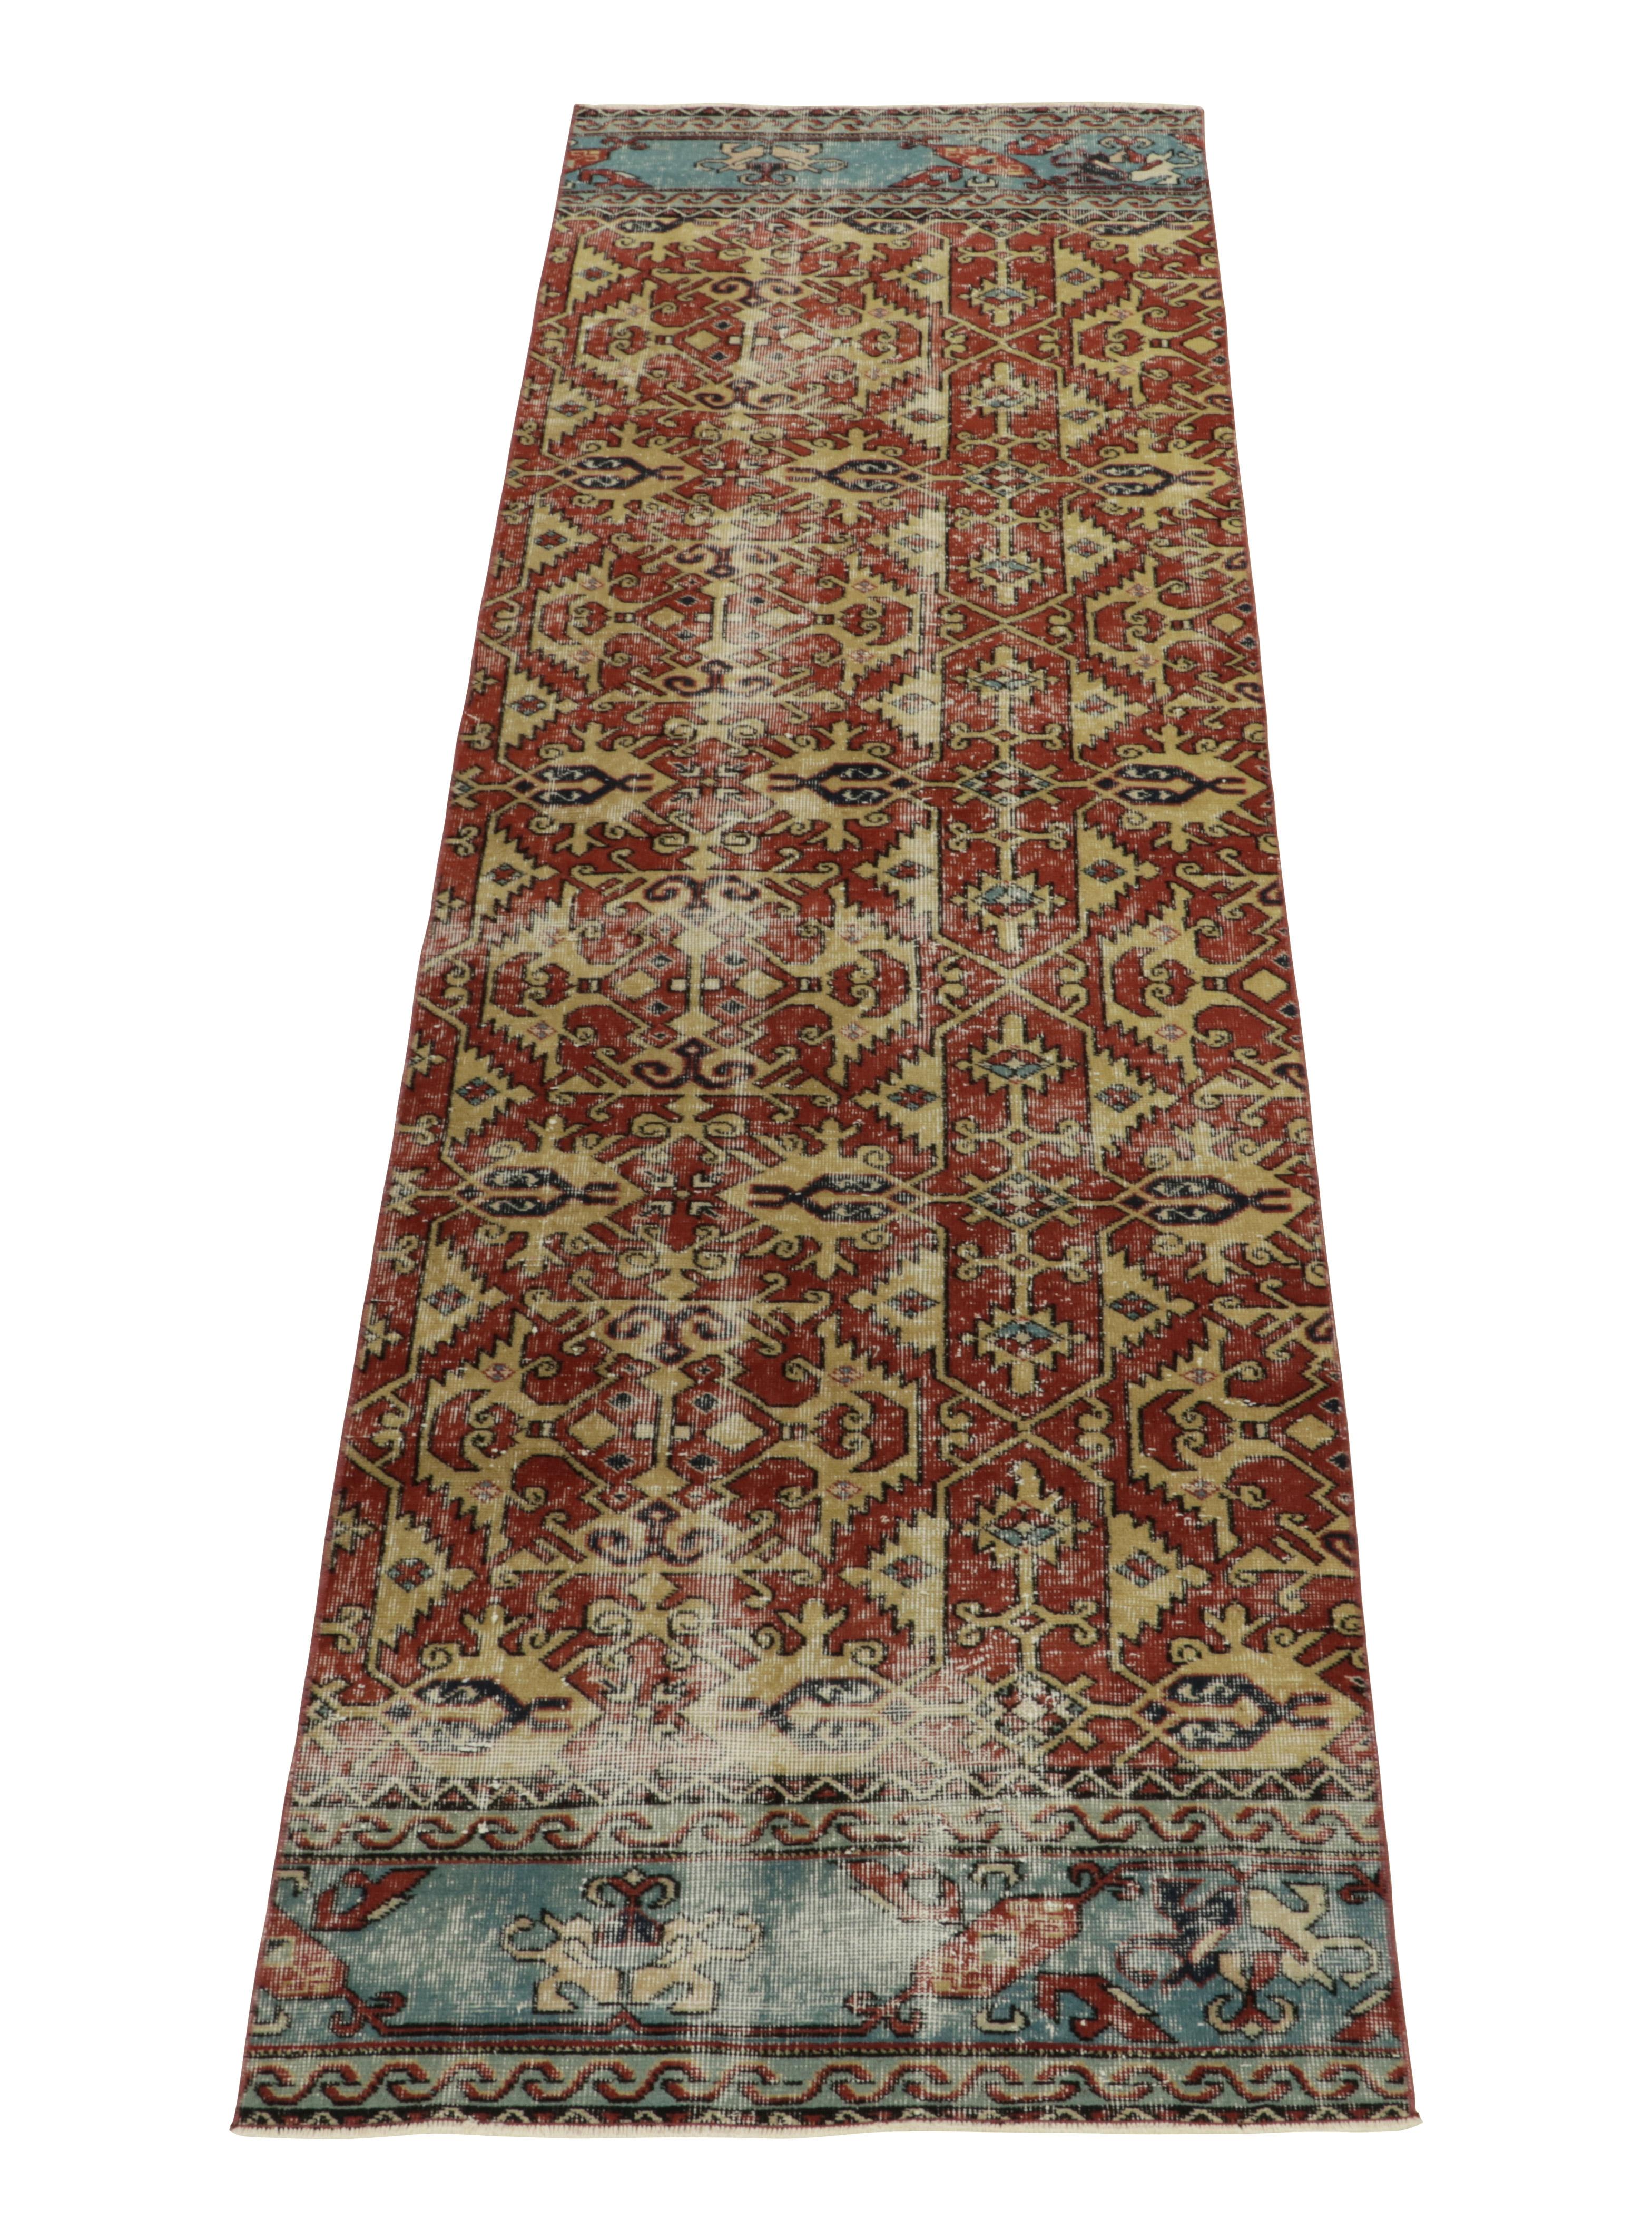 Hand-knotted in low wool pile, a 3x10 vintage runner in distressed style from the works of a revered Turkish designer. 

Originating from Turkey circa 1960-1970, the runner draws lavish inspiration from regal Anatolian geometric patterns in rust